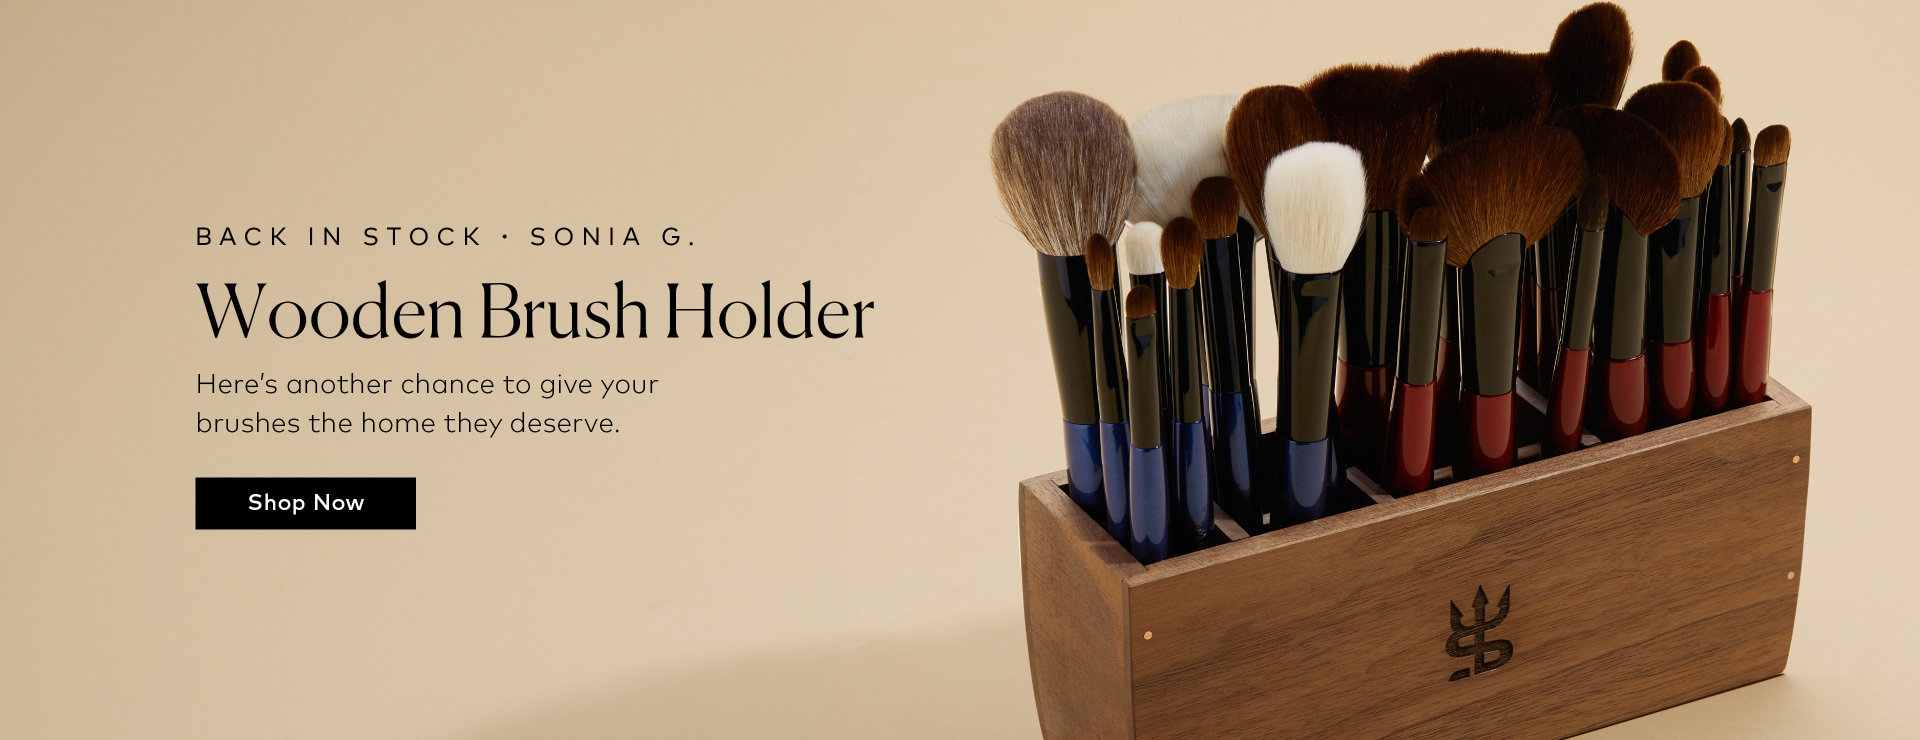 Shop the Sonia G. Wooden Brush Holder now back in stock at Beautylish.com